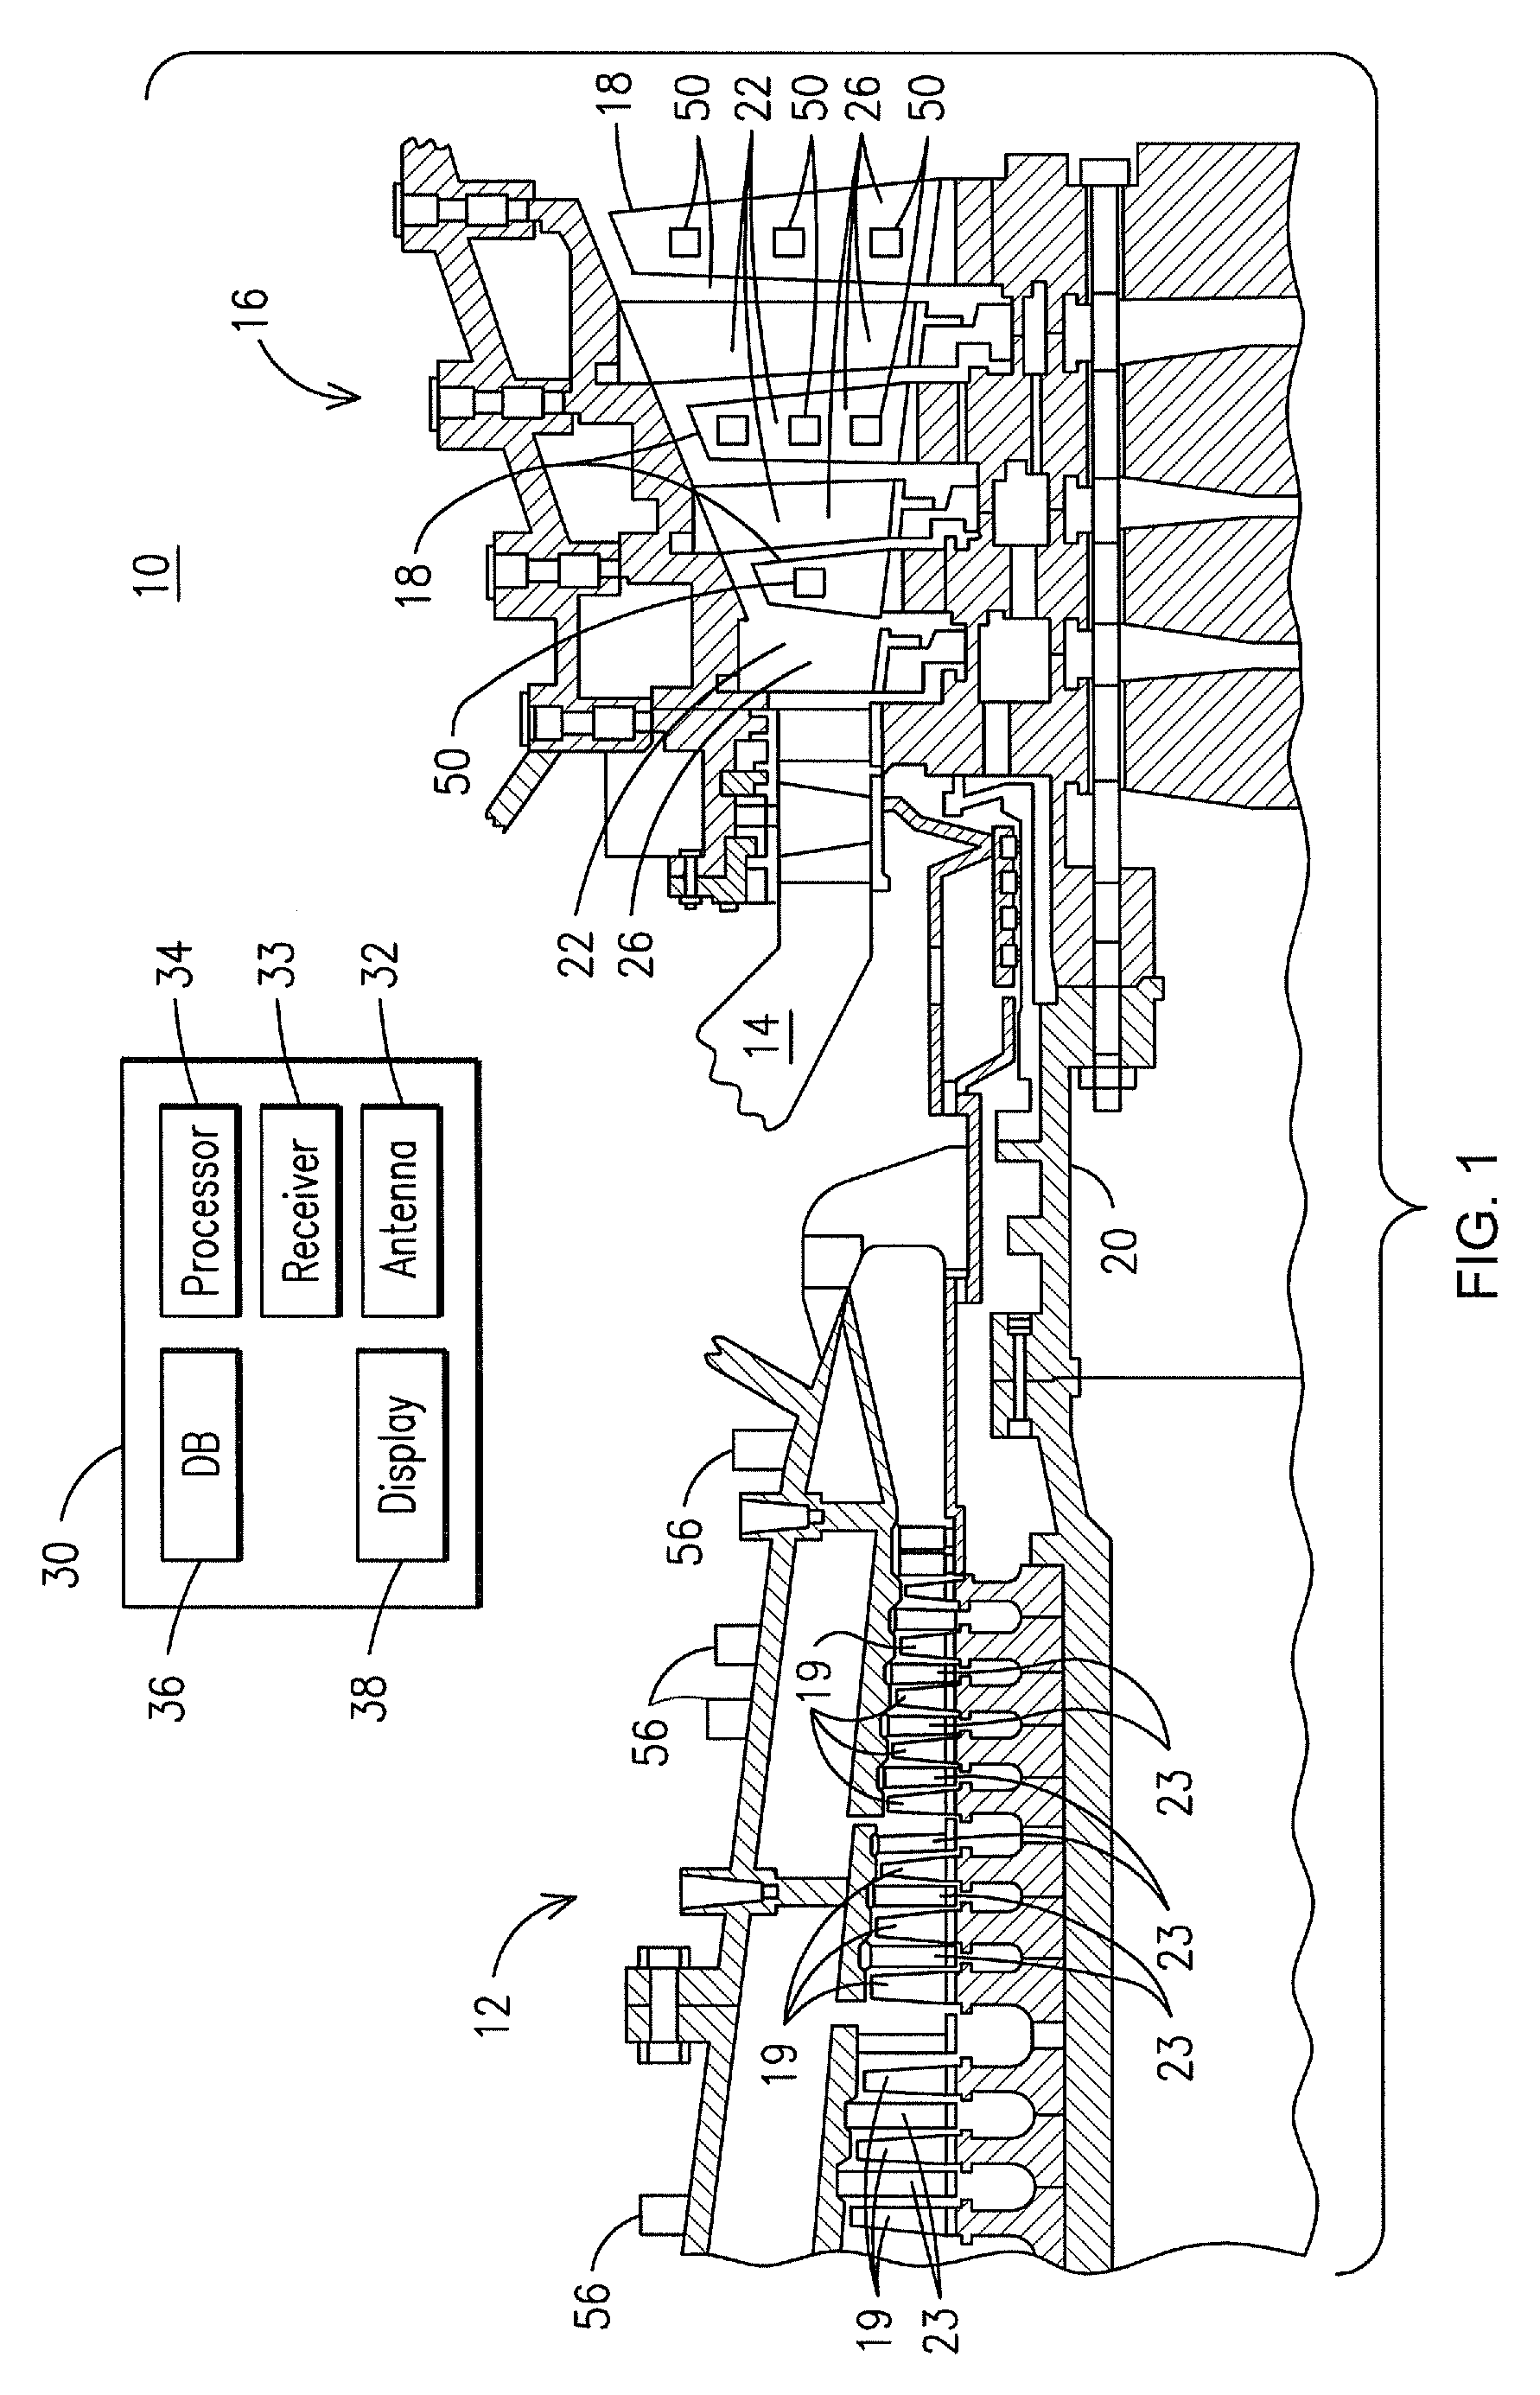 Method for predicting a remaining useful life of an engine and components thereof